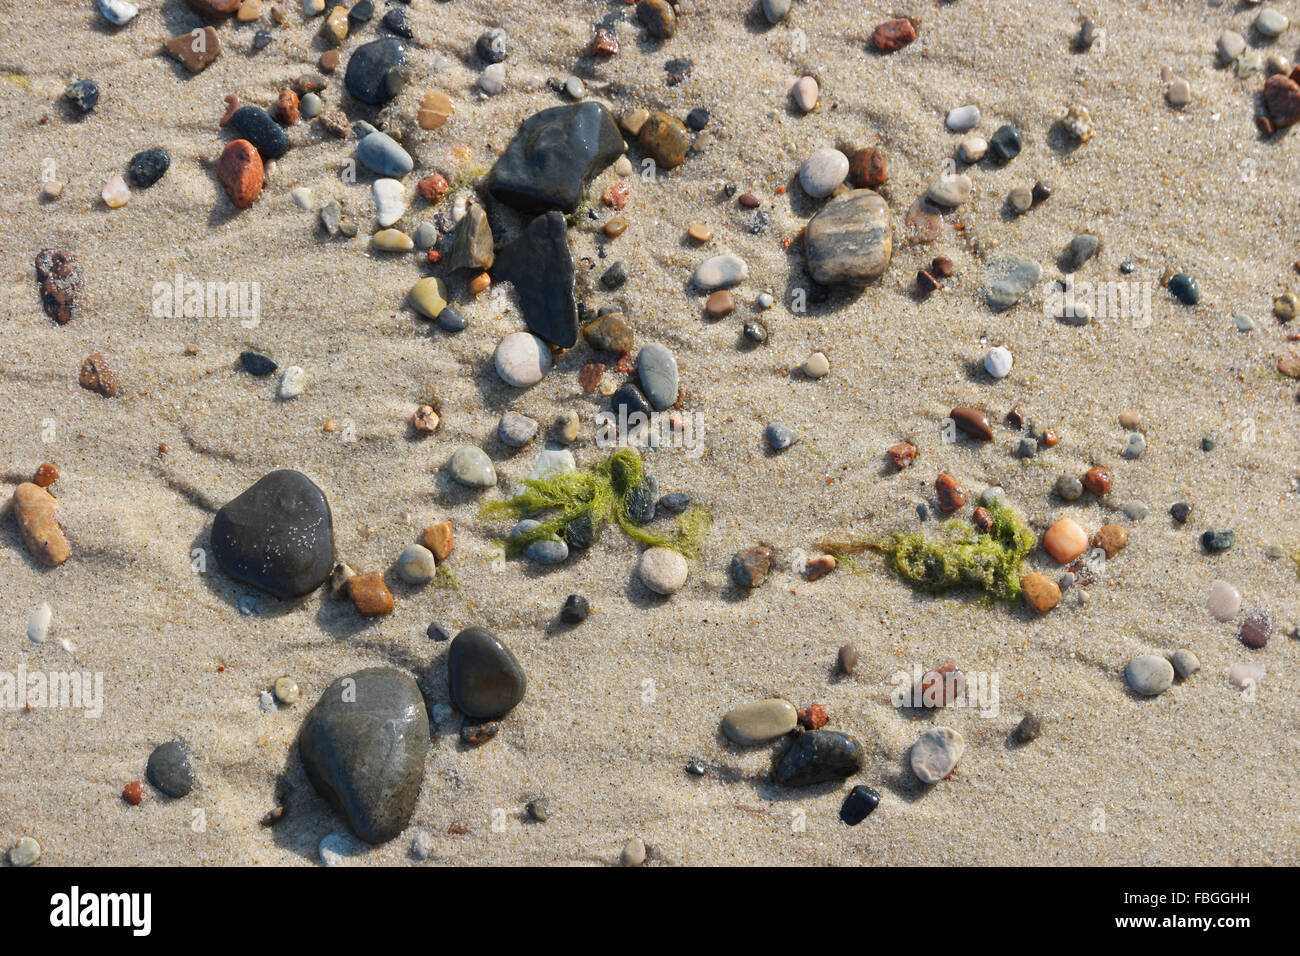 Stones and seaweed on sand beach in close up Stock Photo